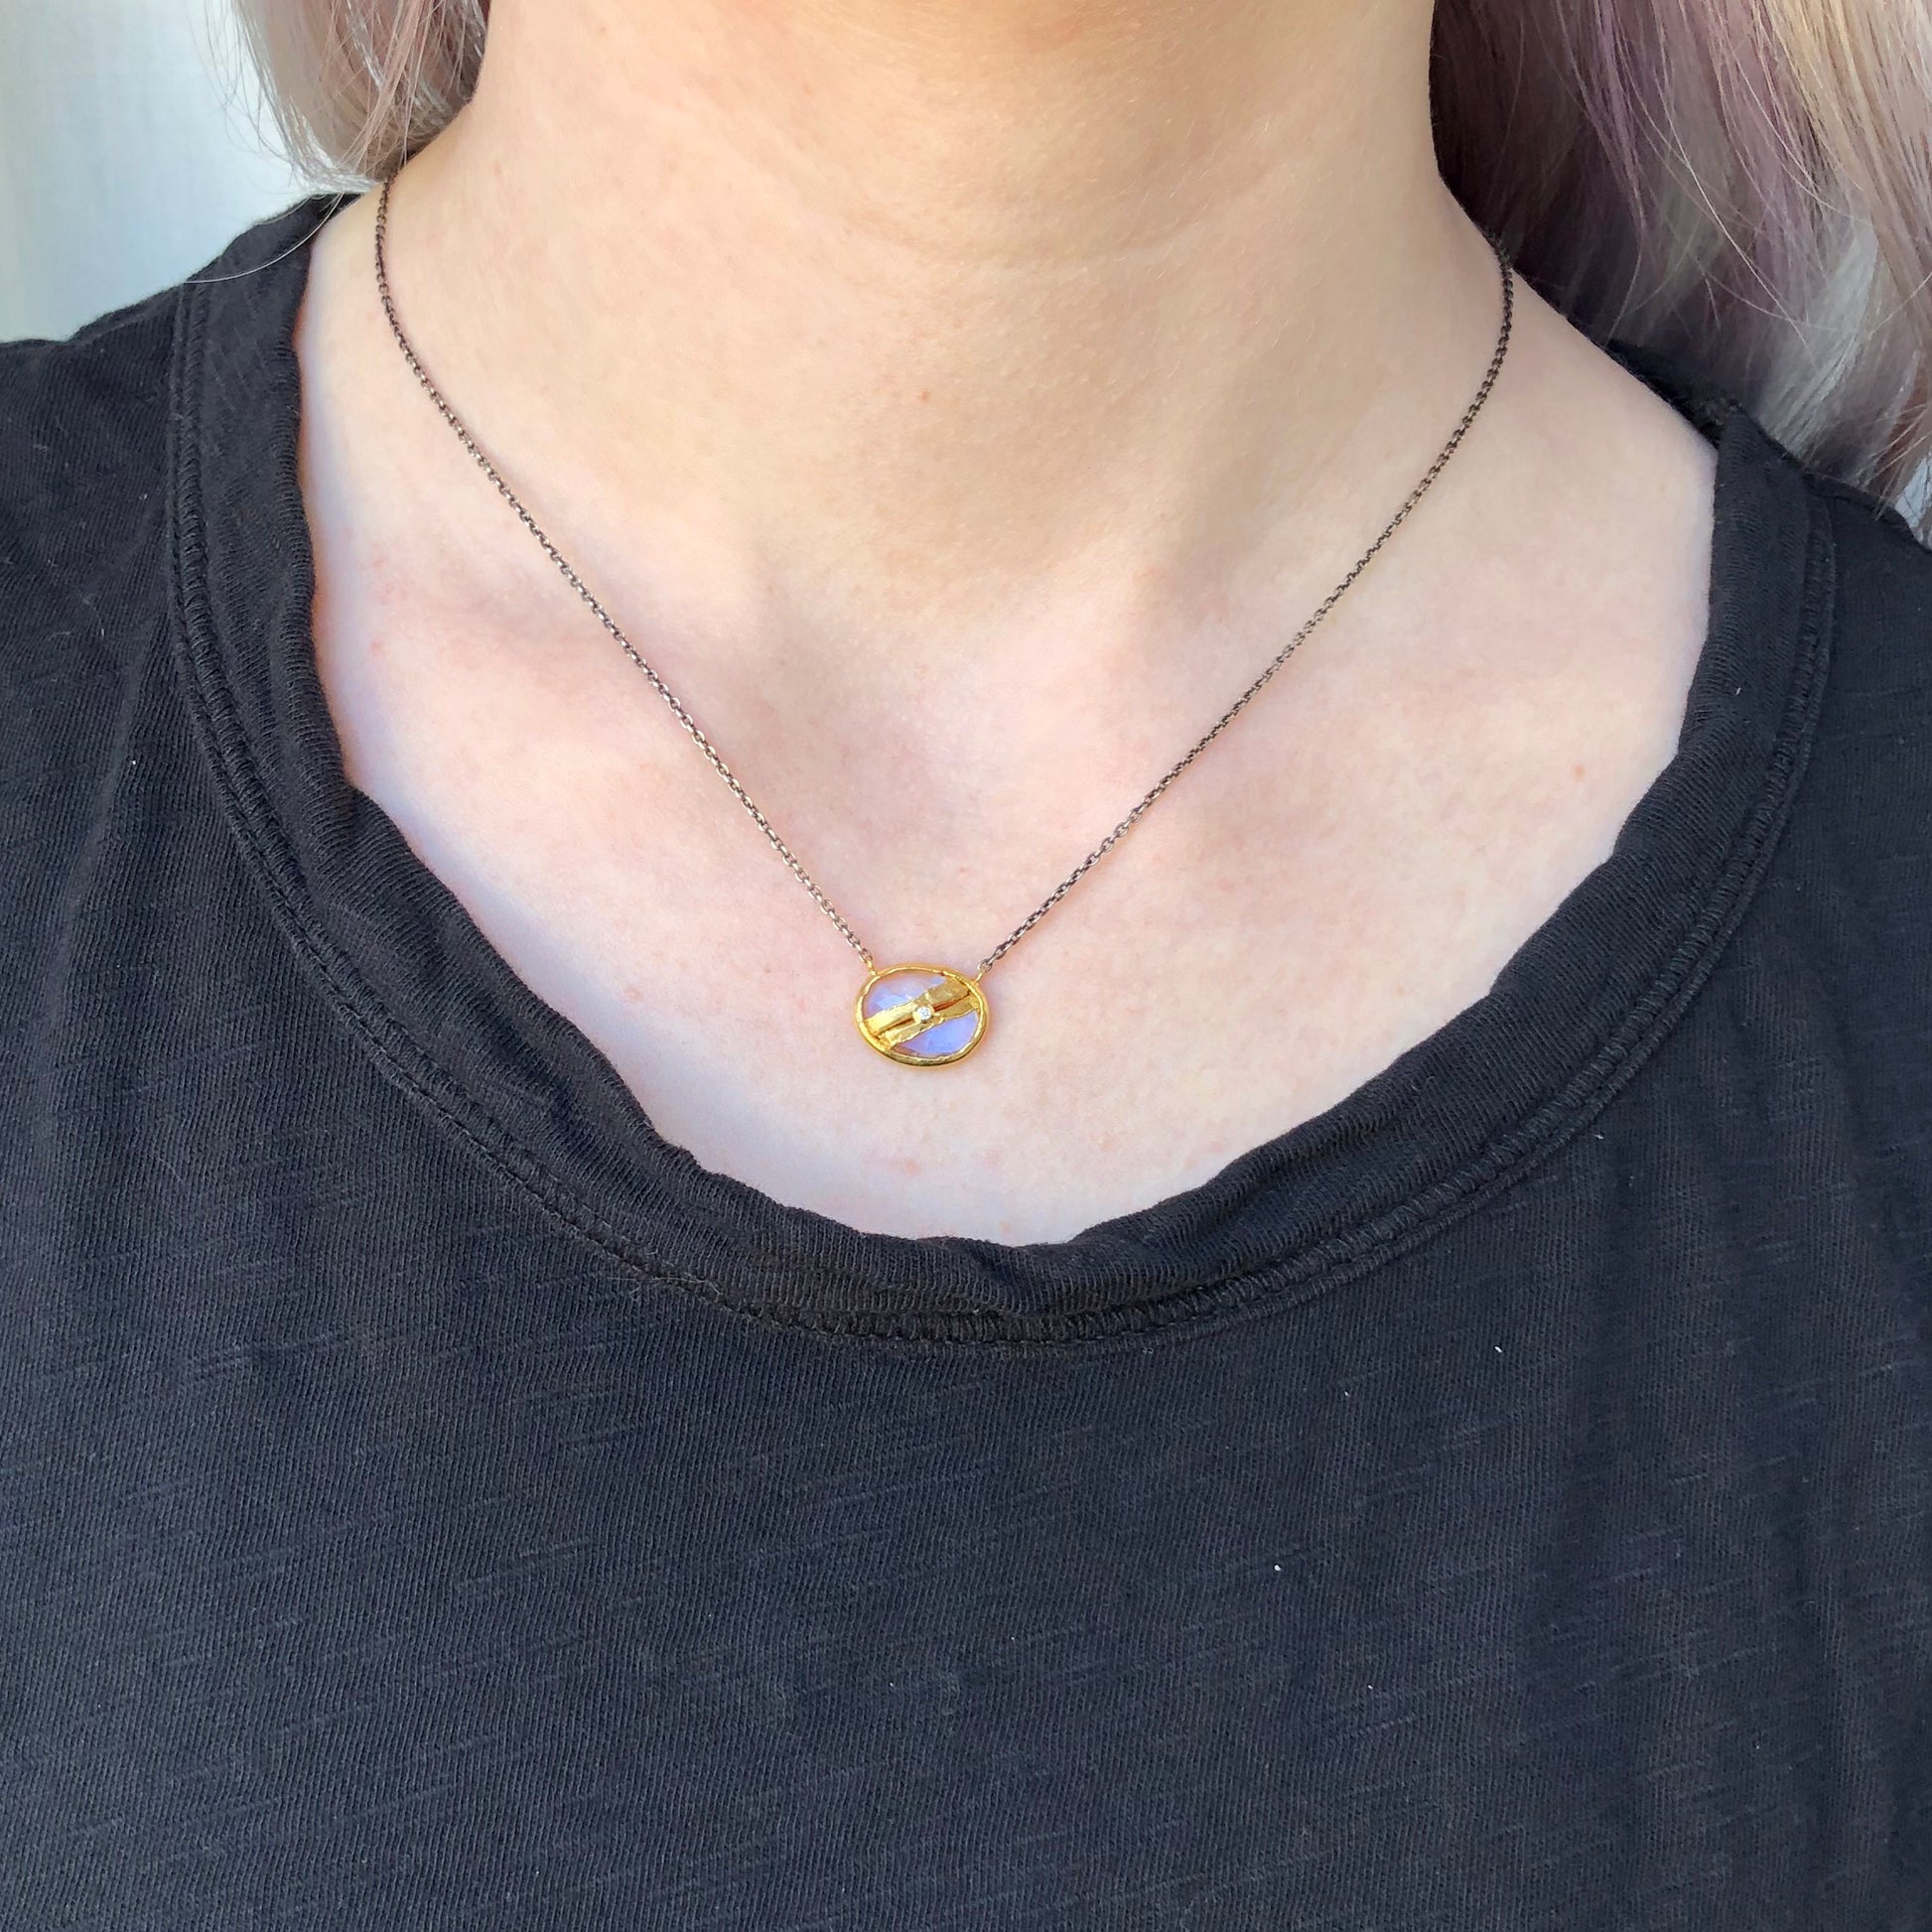 Oxidized Sterling & 22K Golden Joinery White Rainbow Moonstone & Diamond Necklace